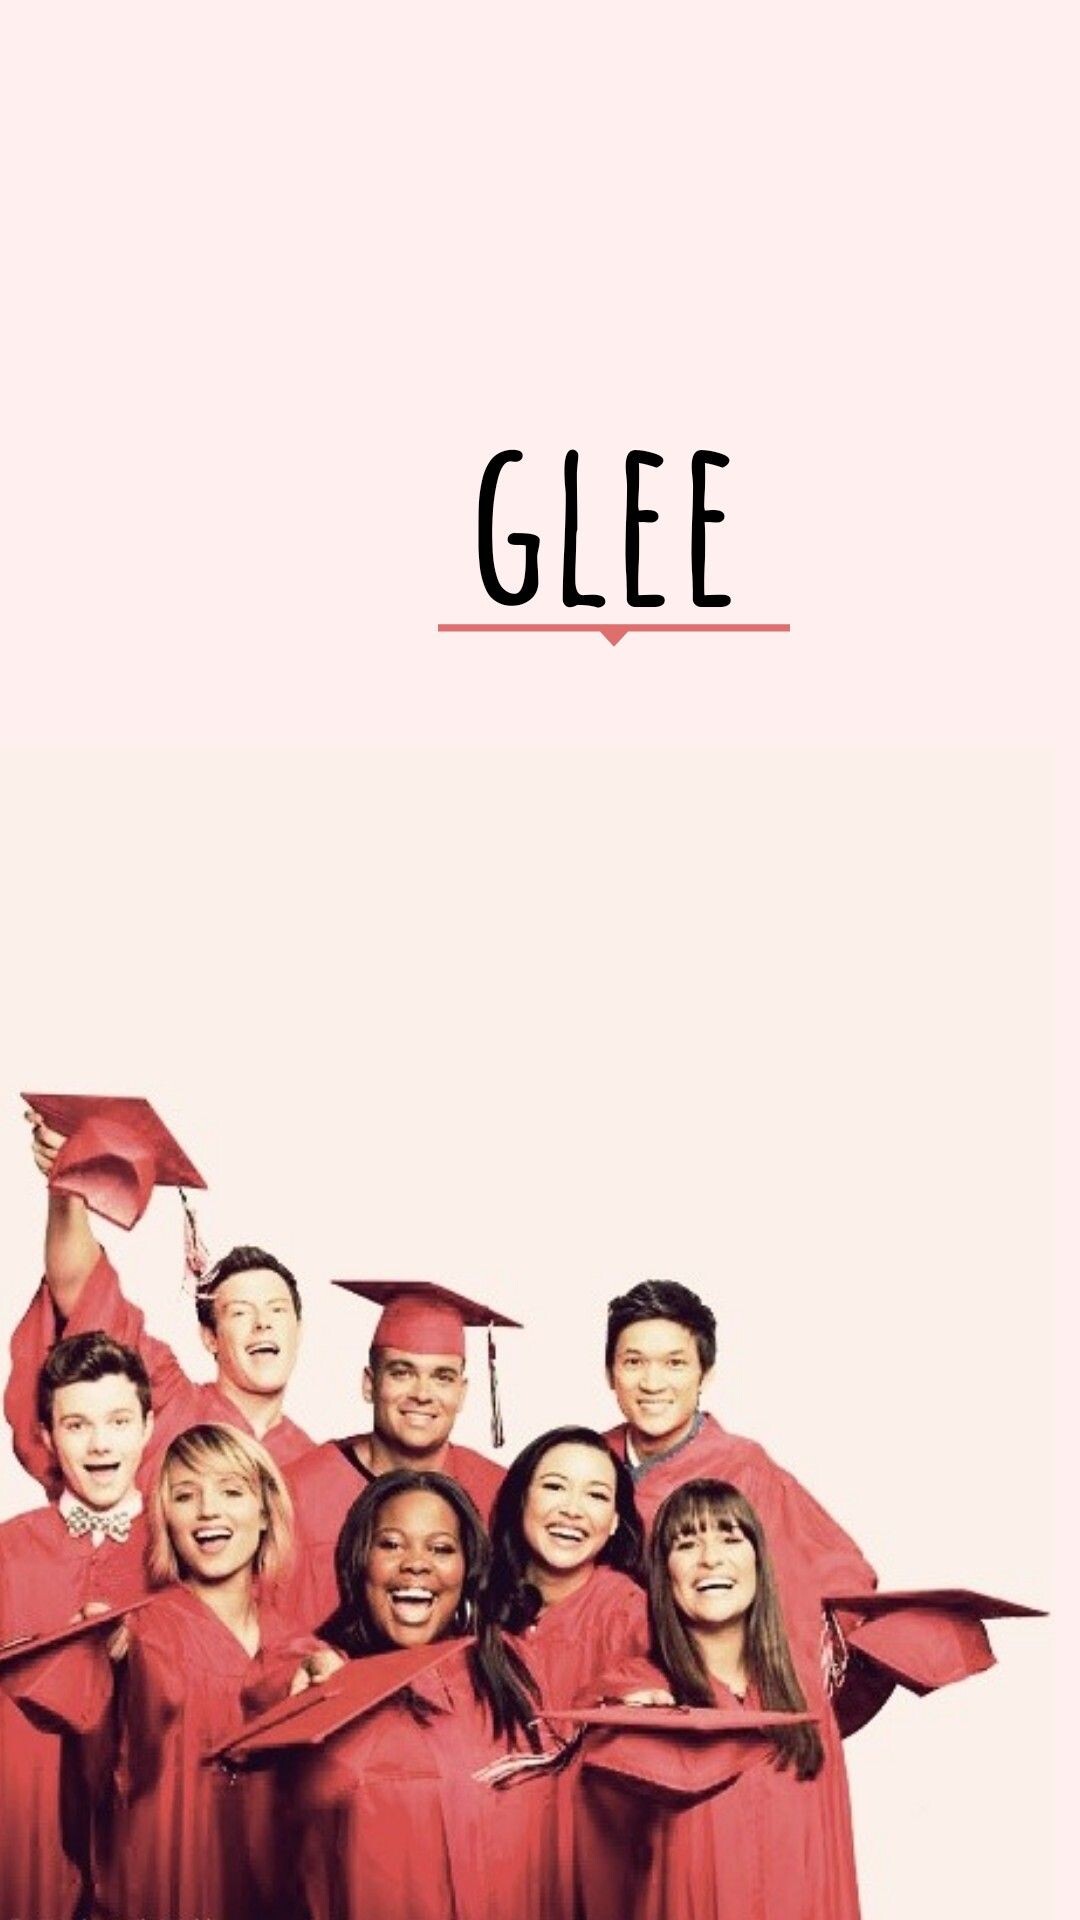 Glee (TV series): William McKinley High School, The New Directions, Student choir group. 1080x1920 Full HD Wallpaper.